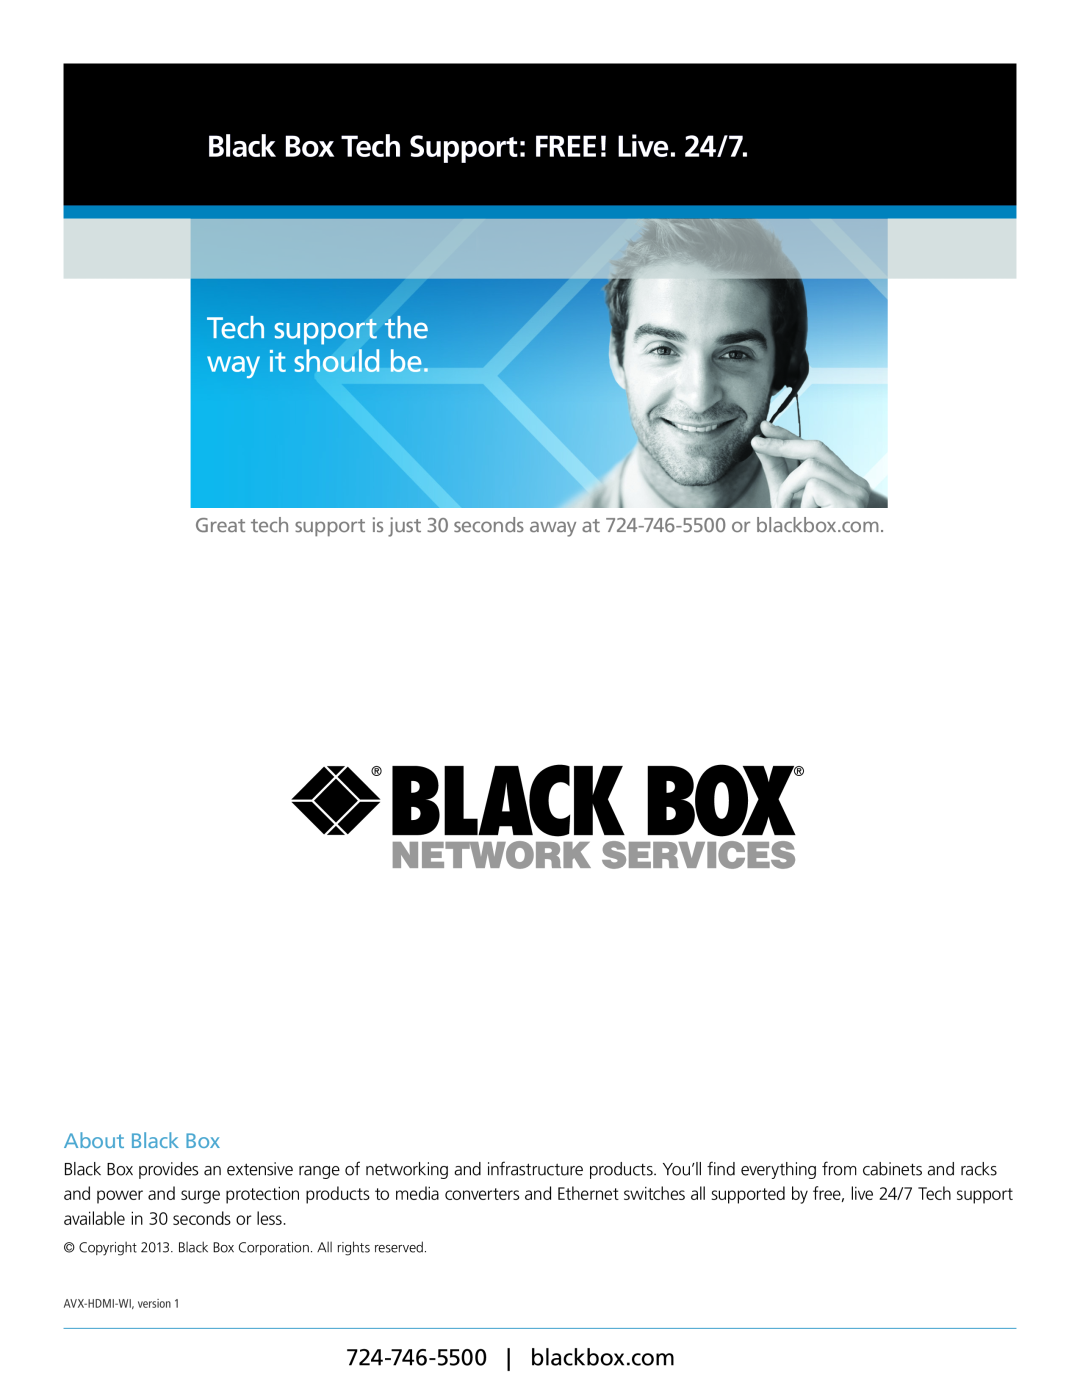 Black Box AVX-HDMI-WI manual Black Box Tech Support FREE! Live. 24/7, Tech support the way it should be, About Black Box 